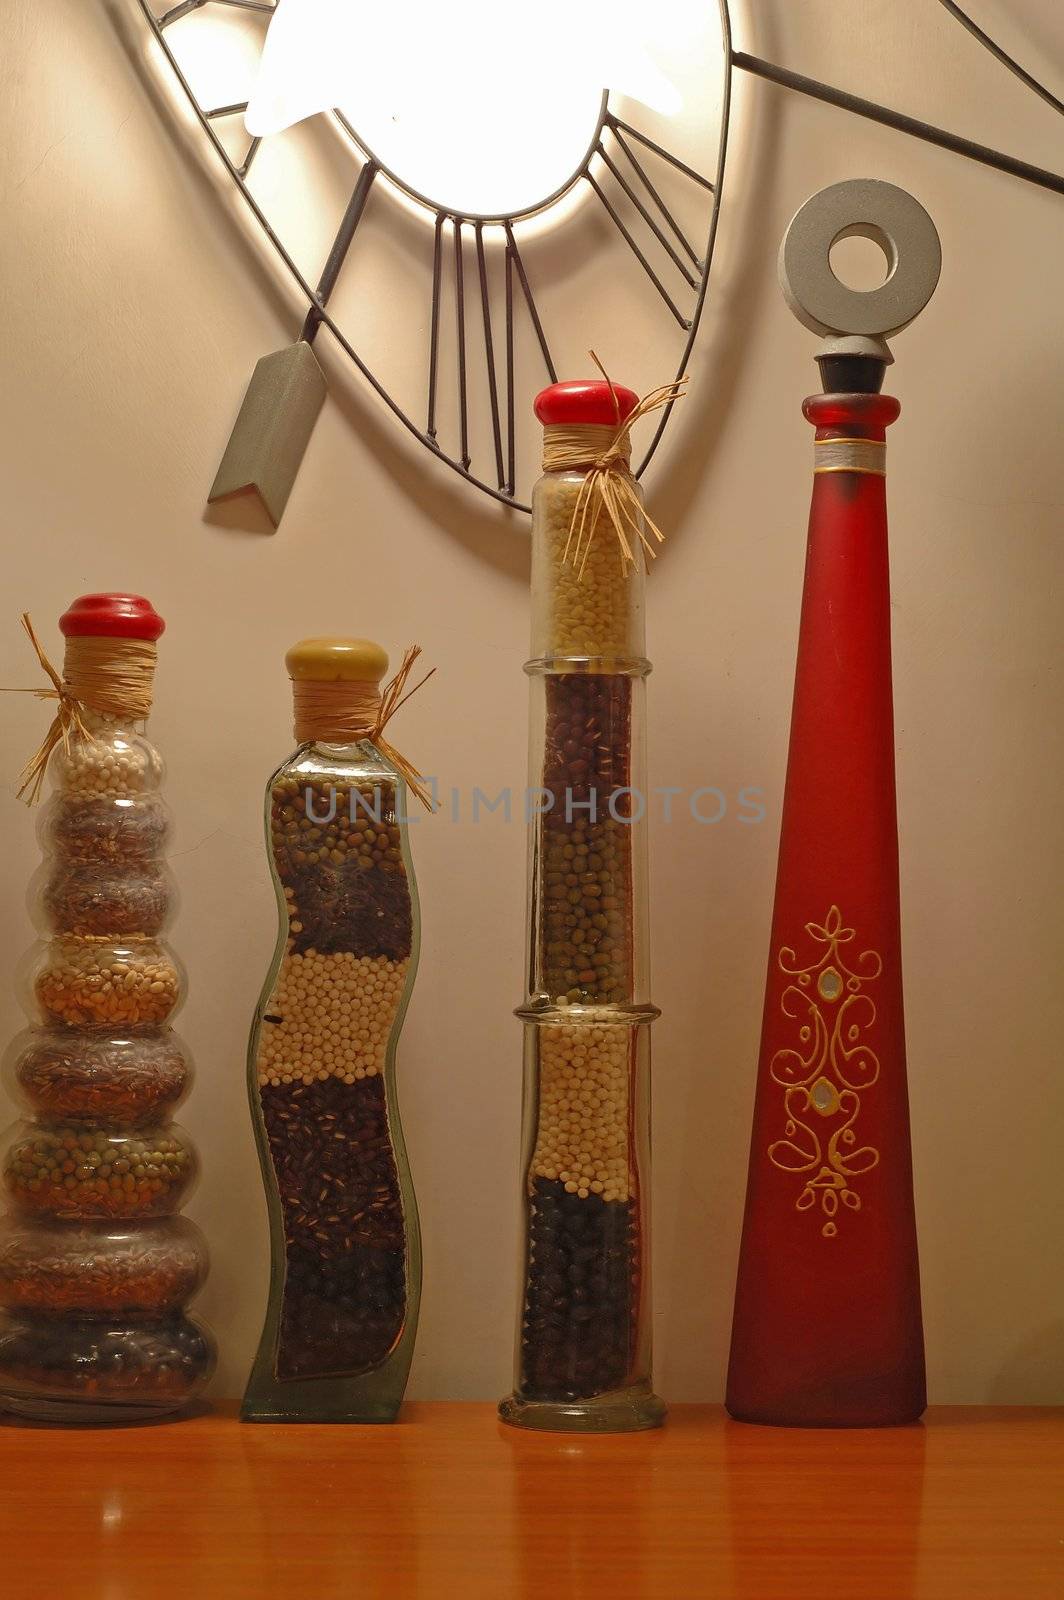 A row of decorative stylish bottles over white wall